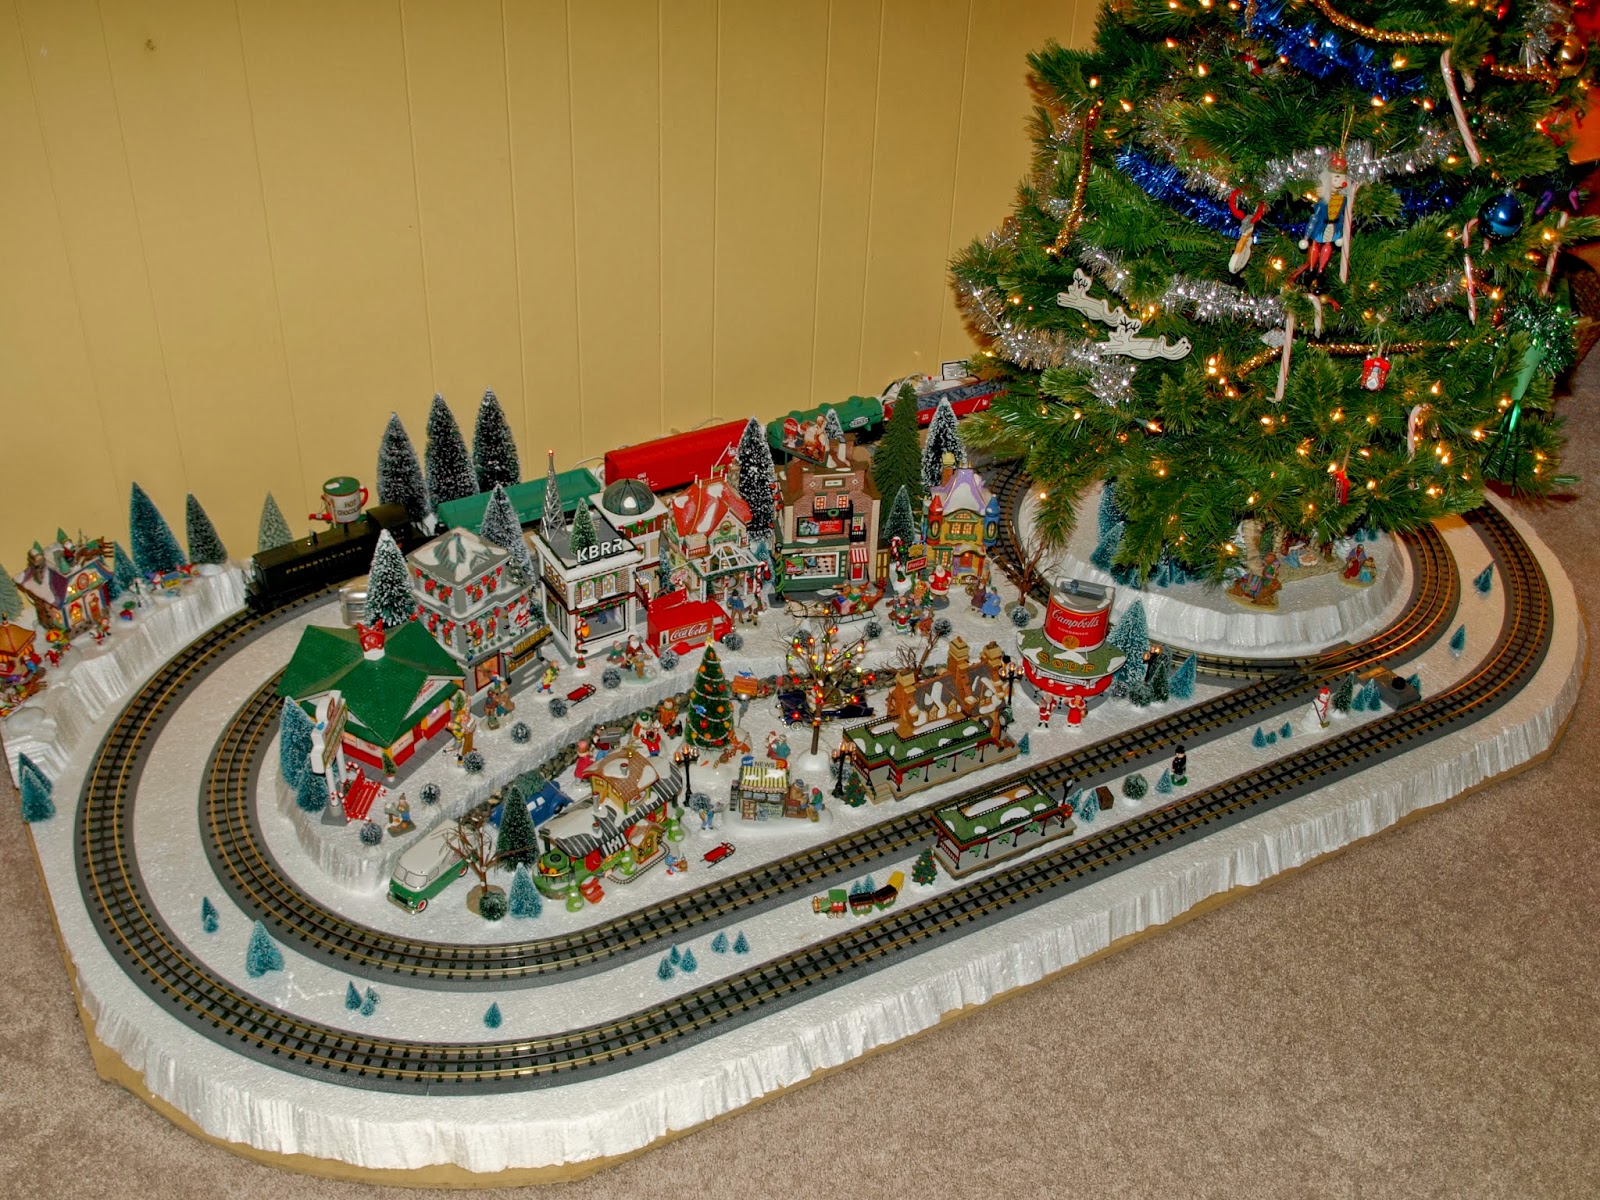 Chinook Hobby Talk: Guide to a Simple Train Around the Christmas Tree